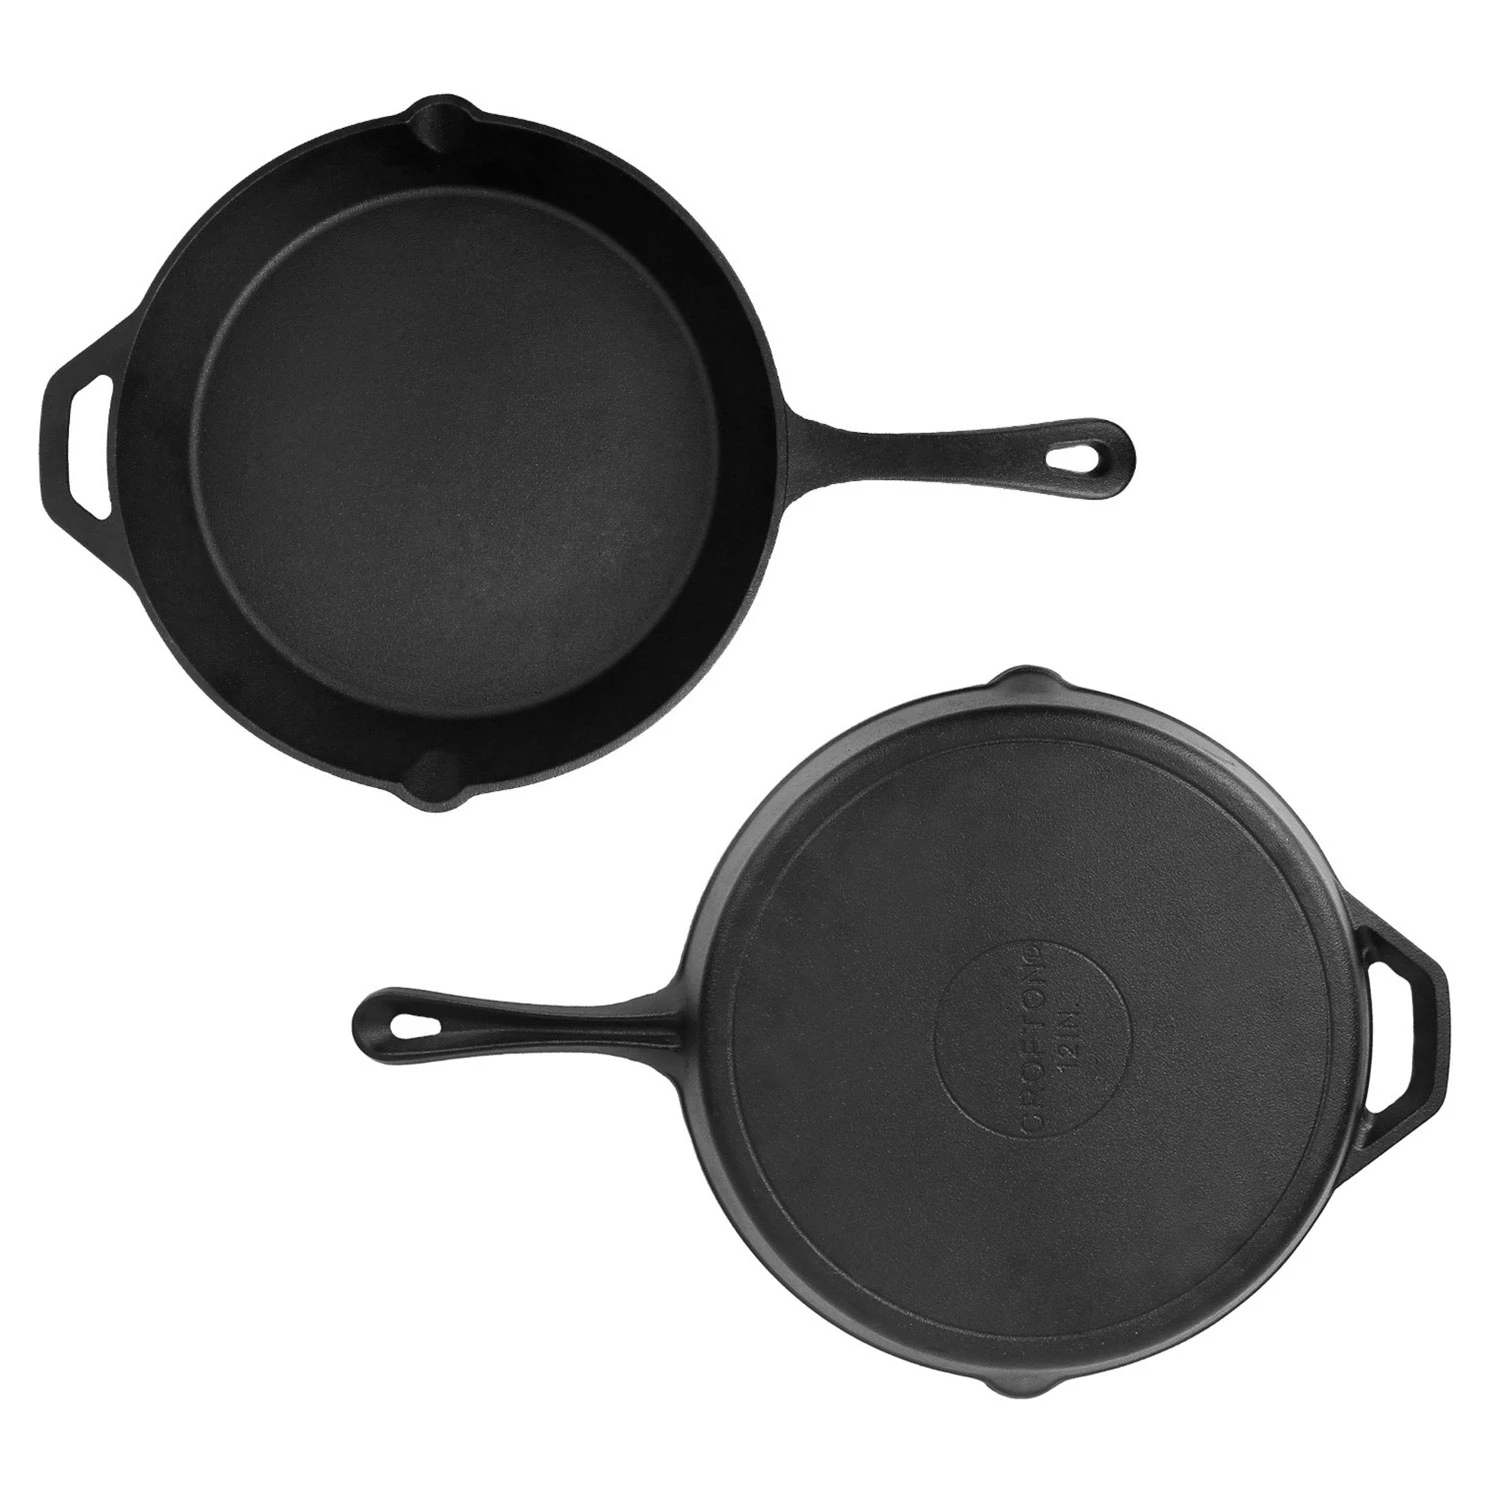 12" Pre-Seasoned Cast Iron Skillet - Oven Safe, Non-Stick Surface - Ideal for Cooking, Frying